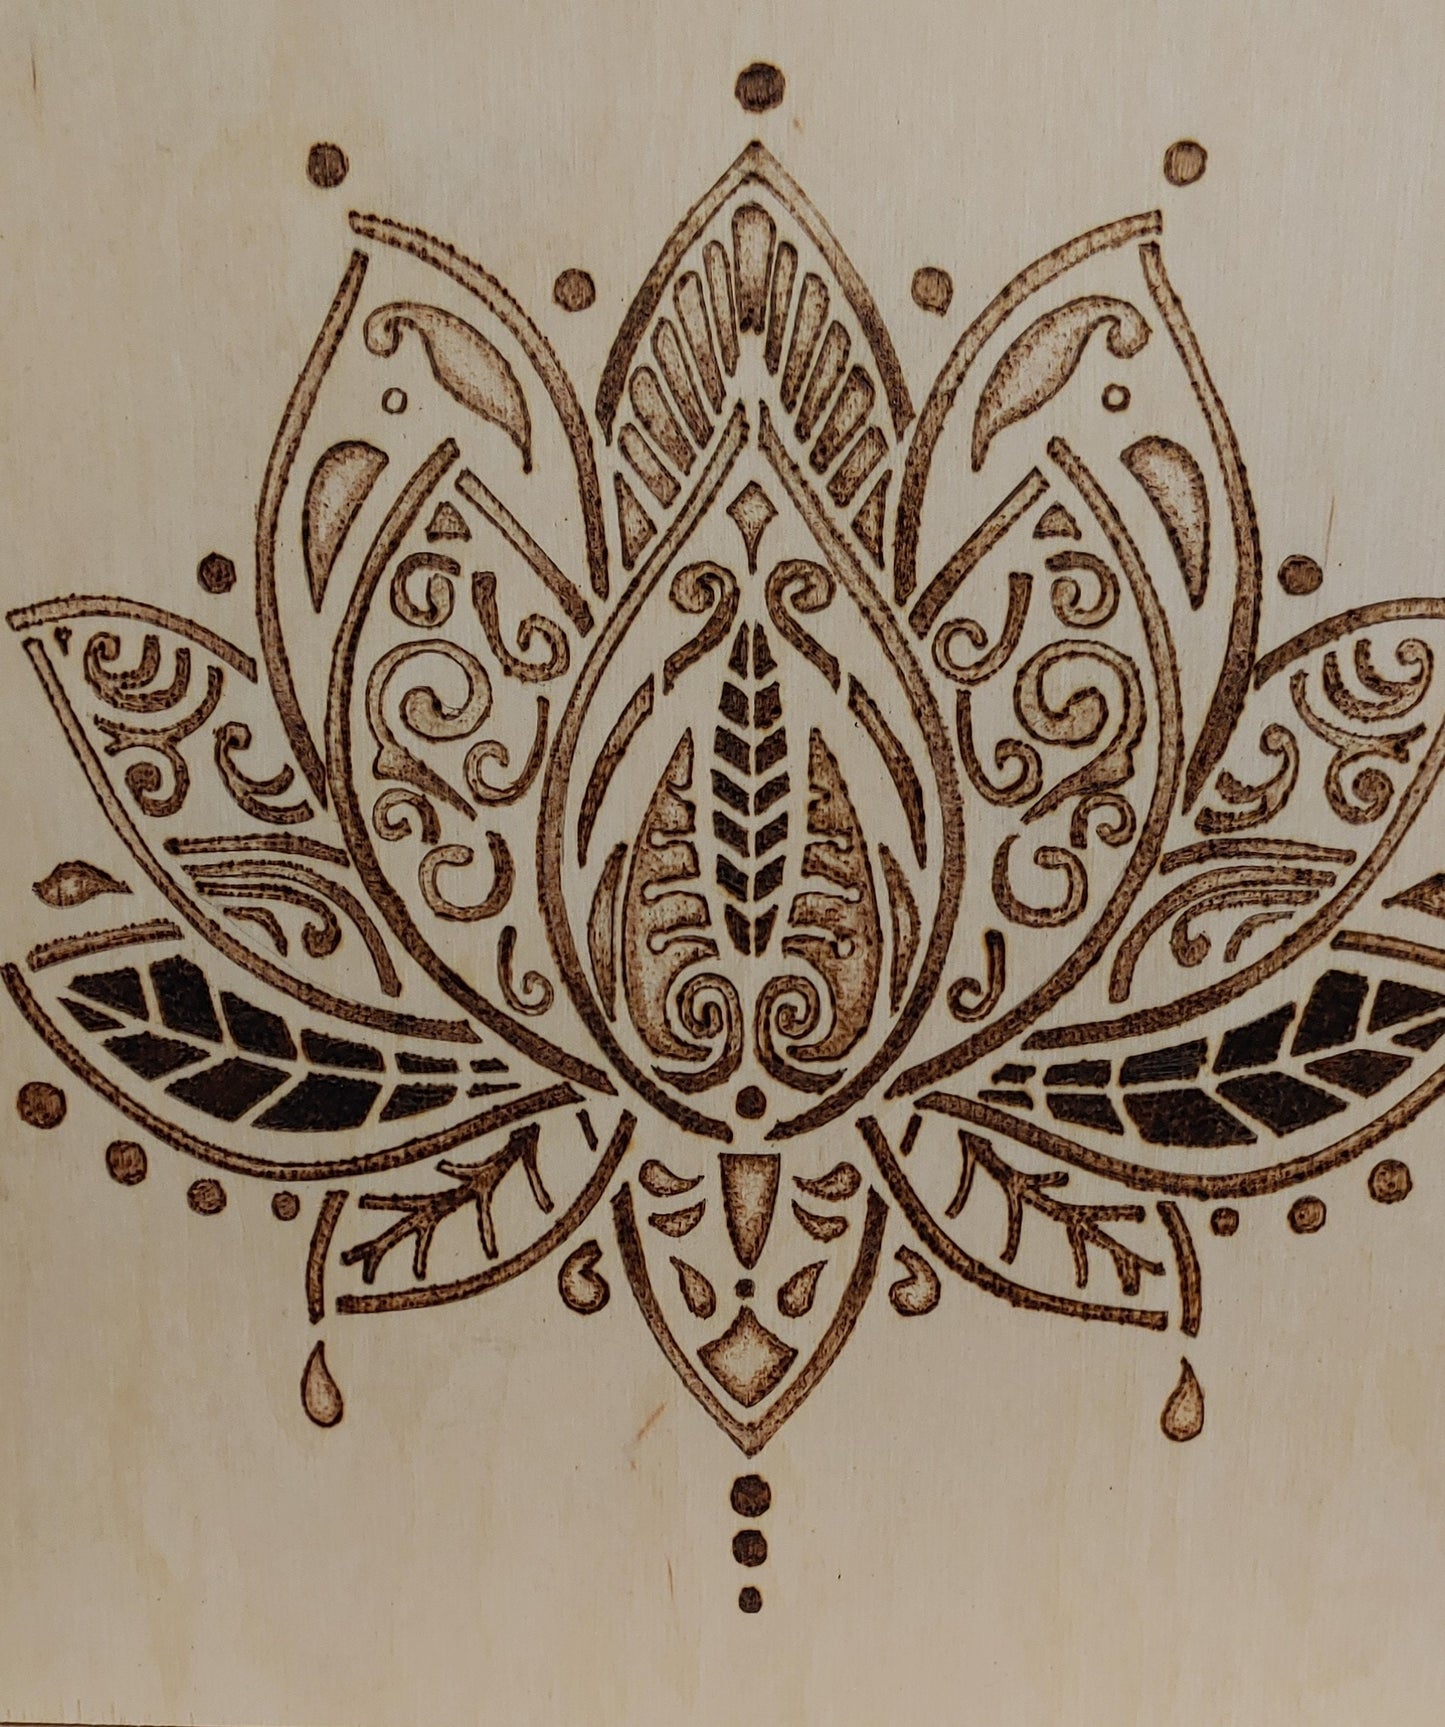 Lotus Flower-#1 Hand-Crafted Wood burning (Pyrography) on Birch